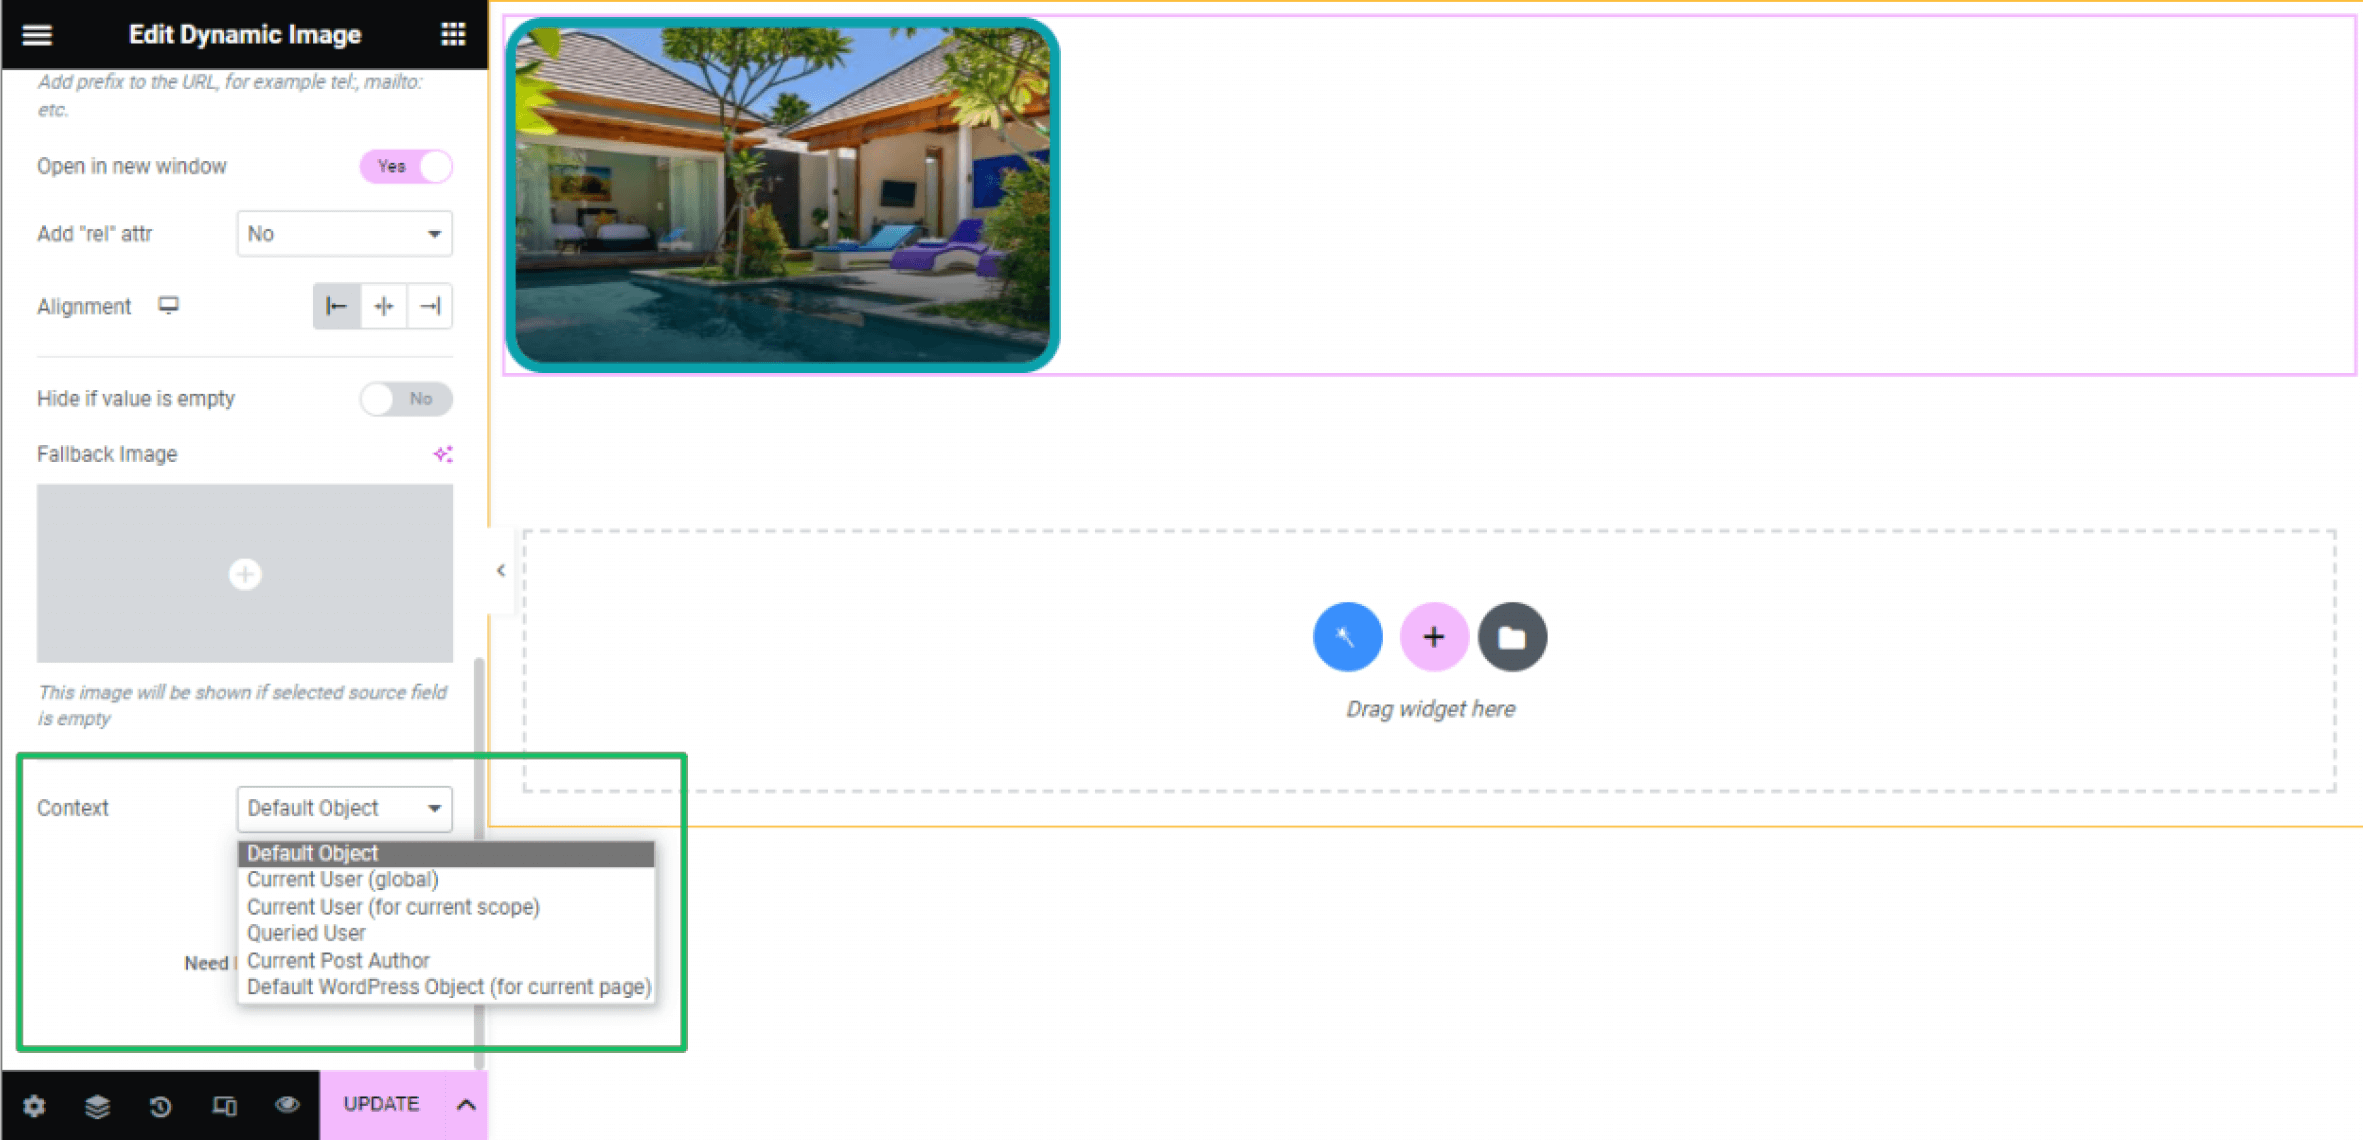 Random asset / avatar thumbails on the website are showing default